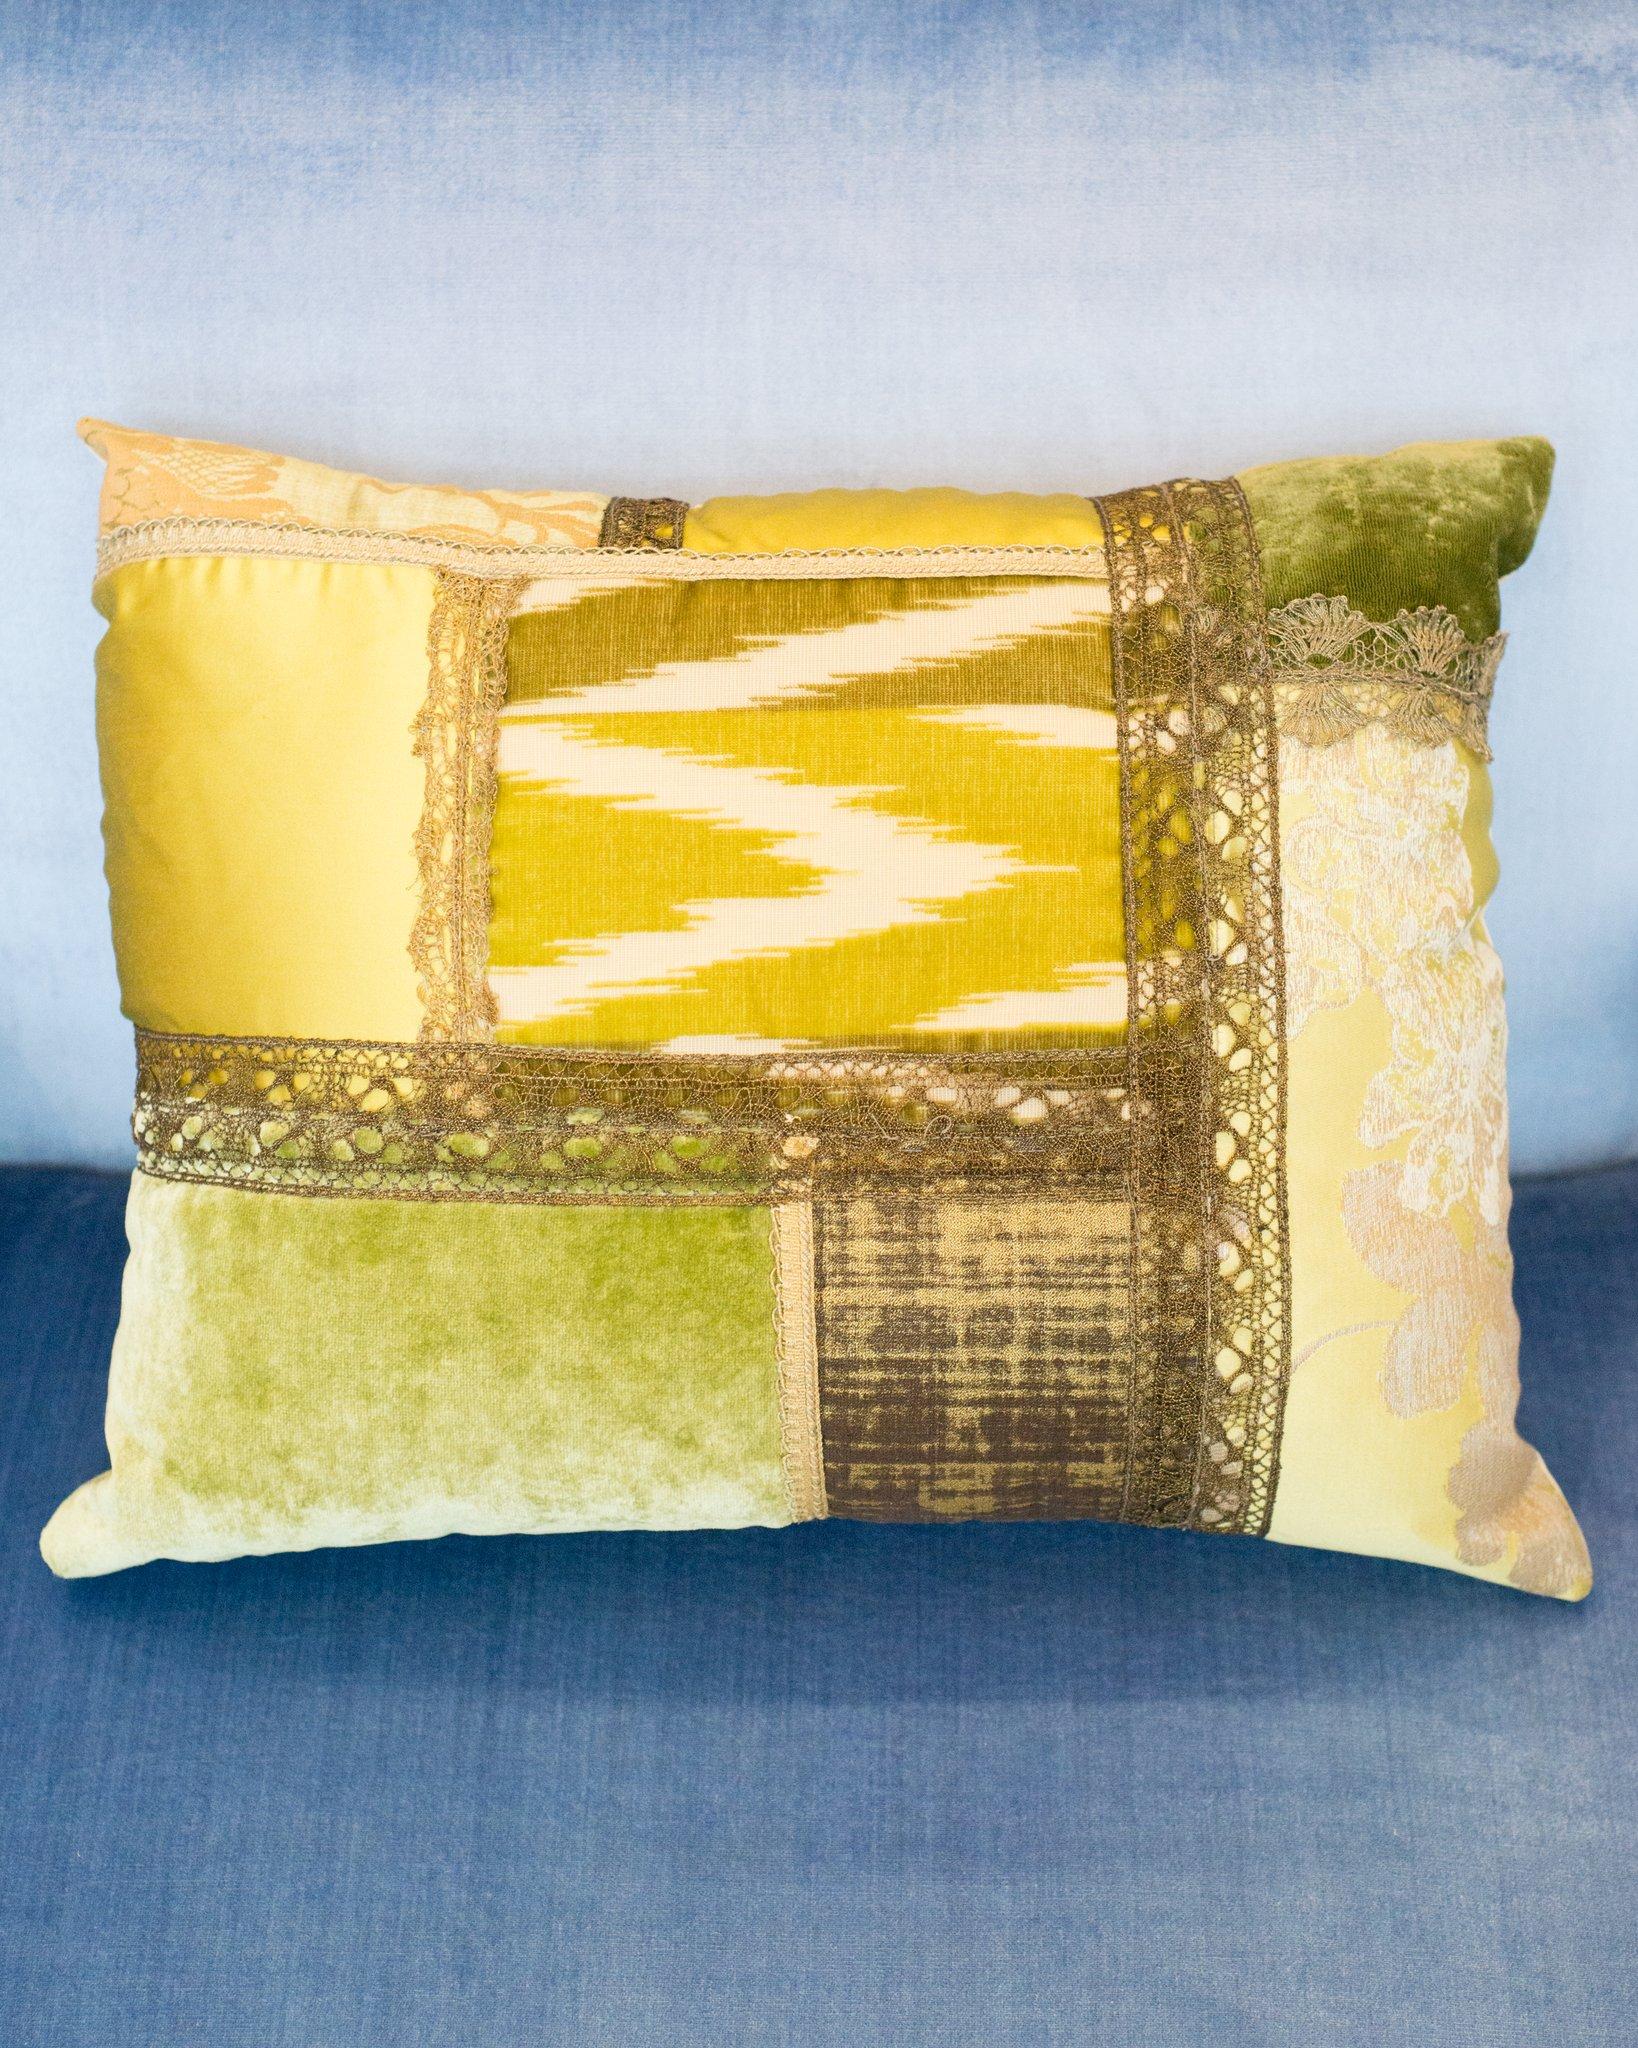 A Studio Maison Nurita handmade patchwork pillow in a variety of green silks and silk velvets with vintage metallic trims, backed in beige silk and down filled.